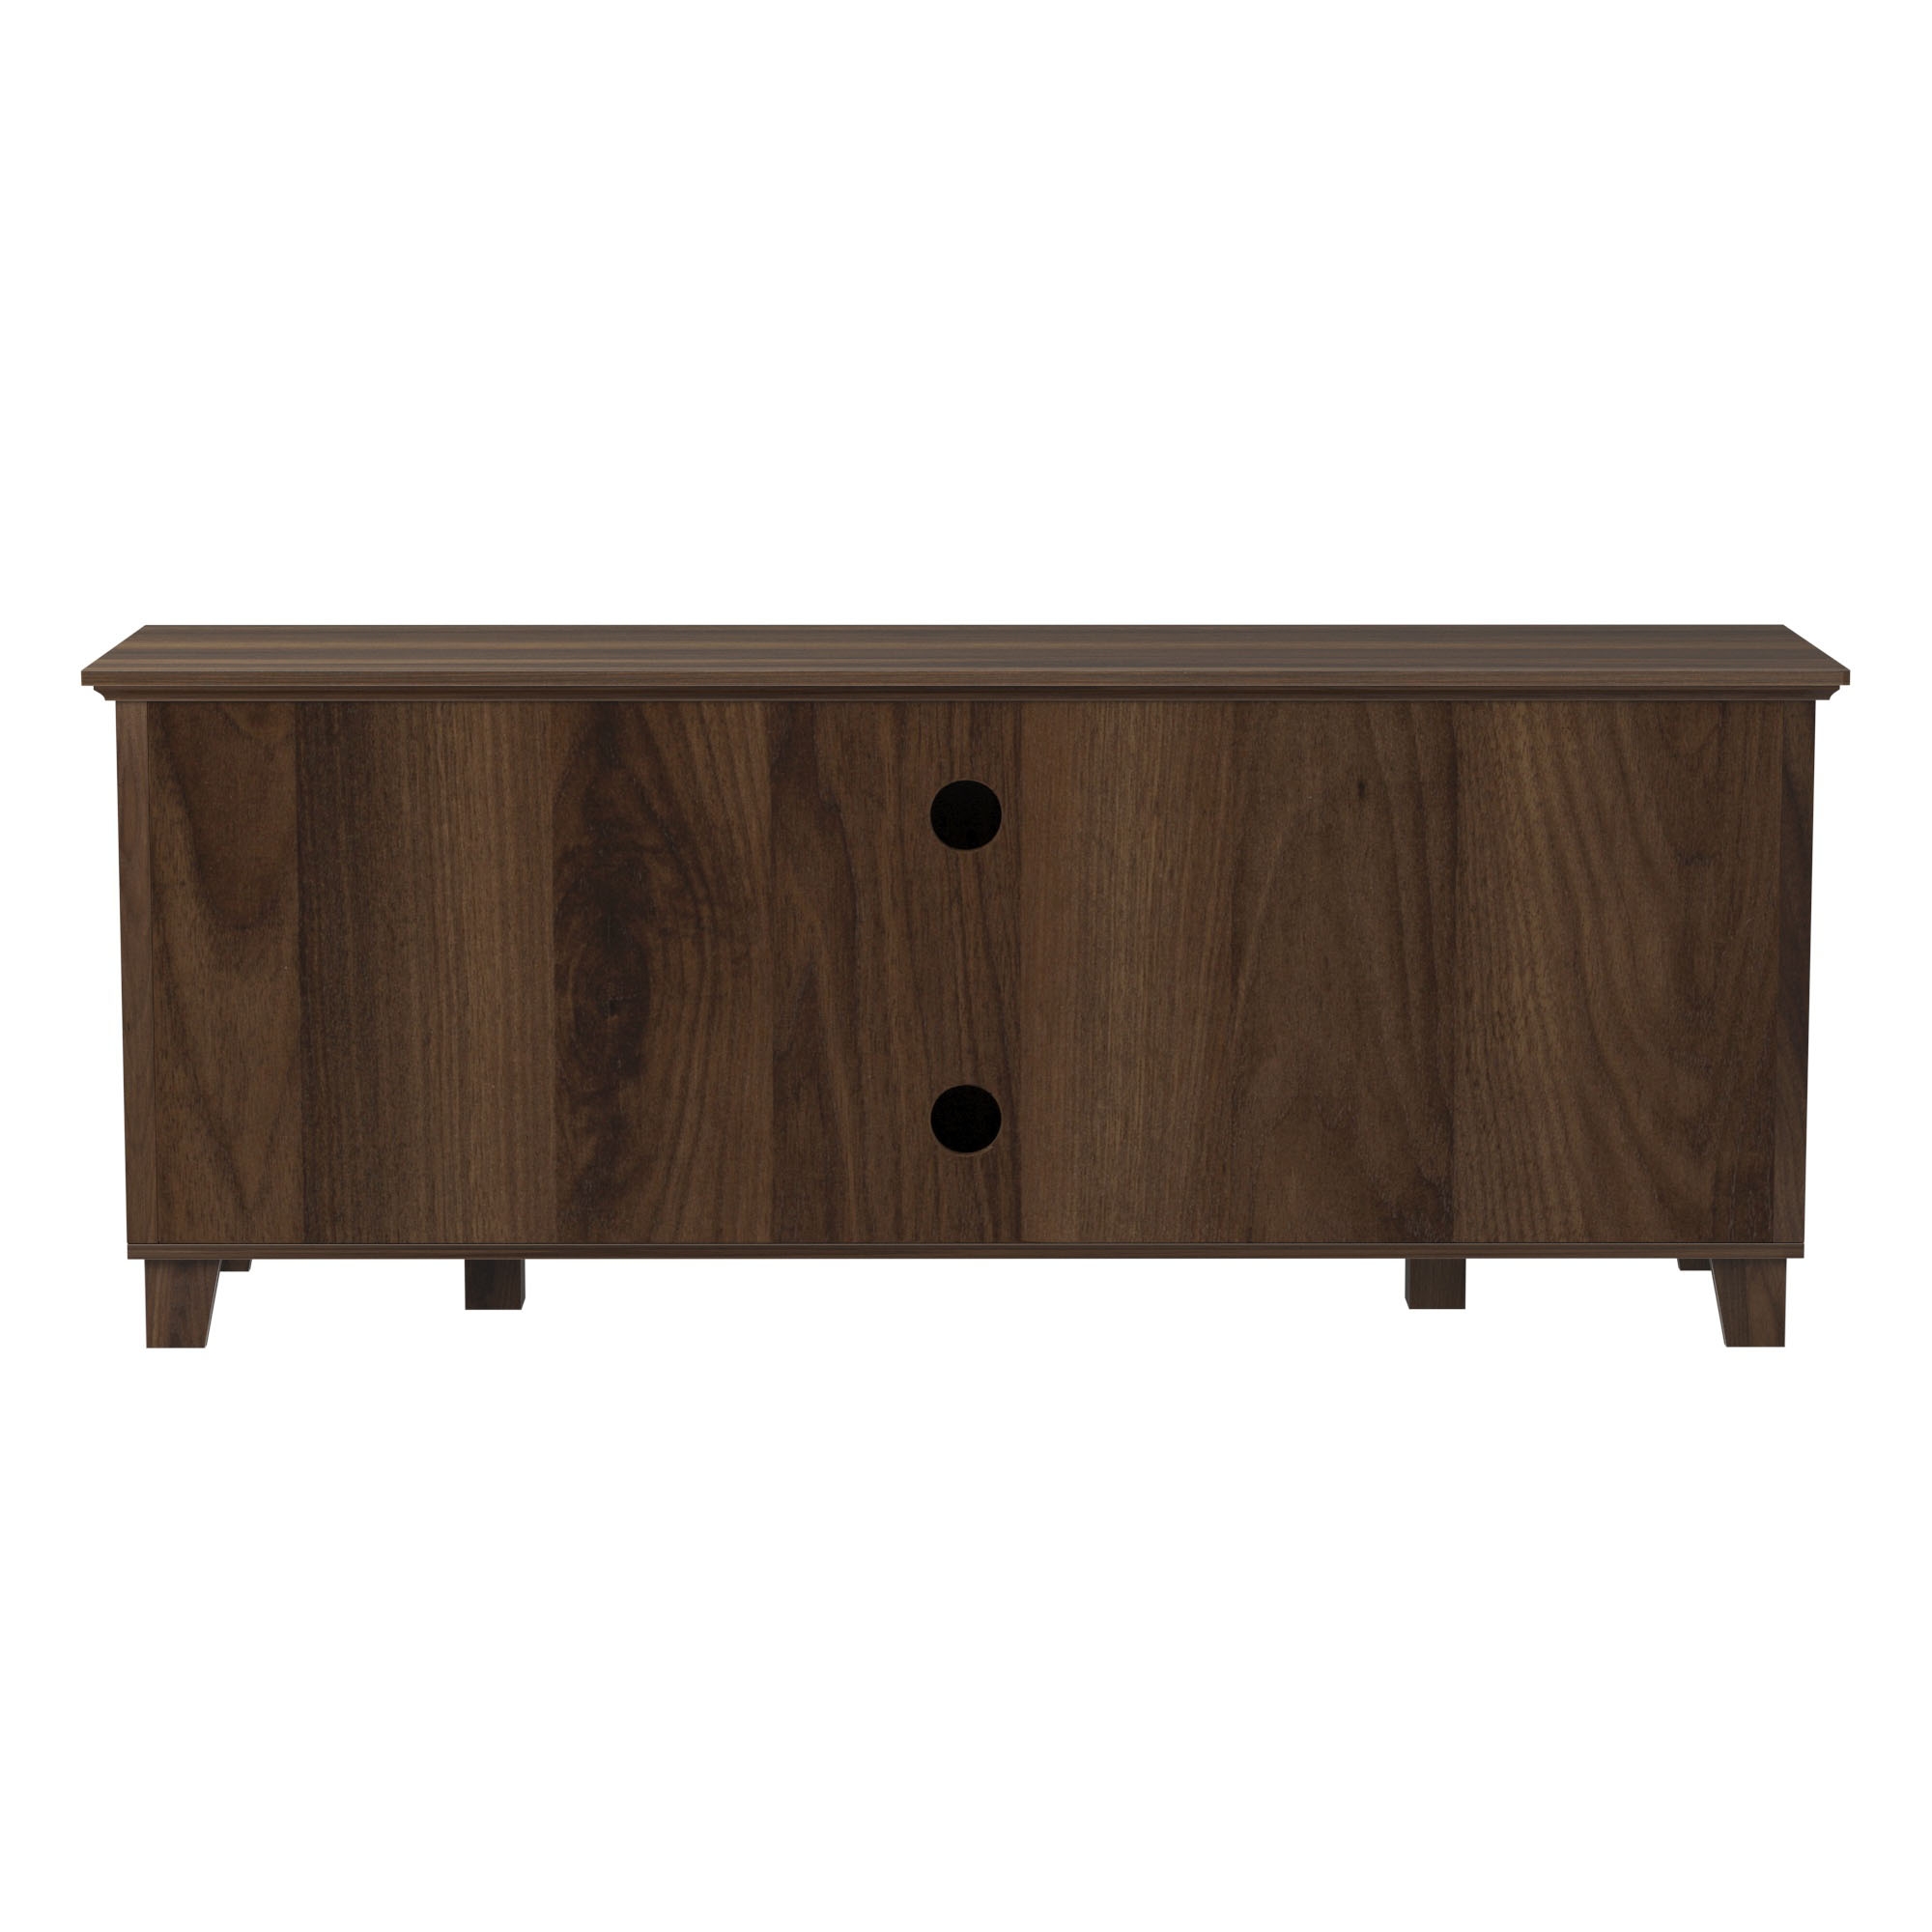 Columbus 58" TV Stand with Middle Doors - Dark Walnut - Image 3